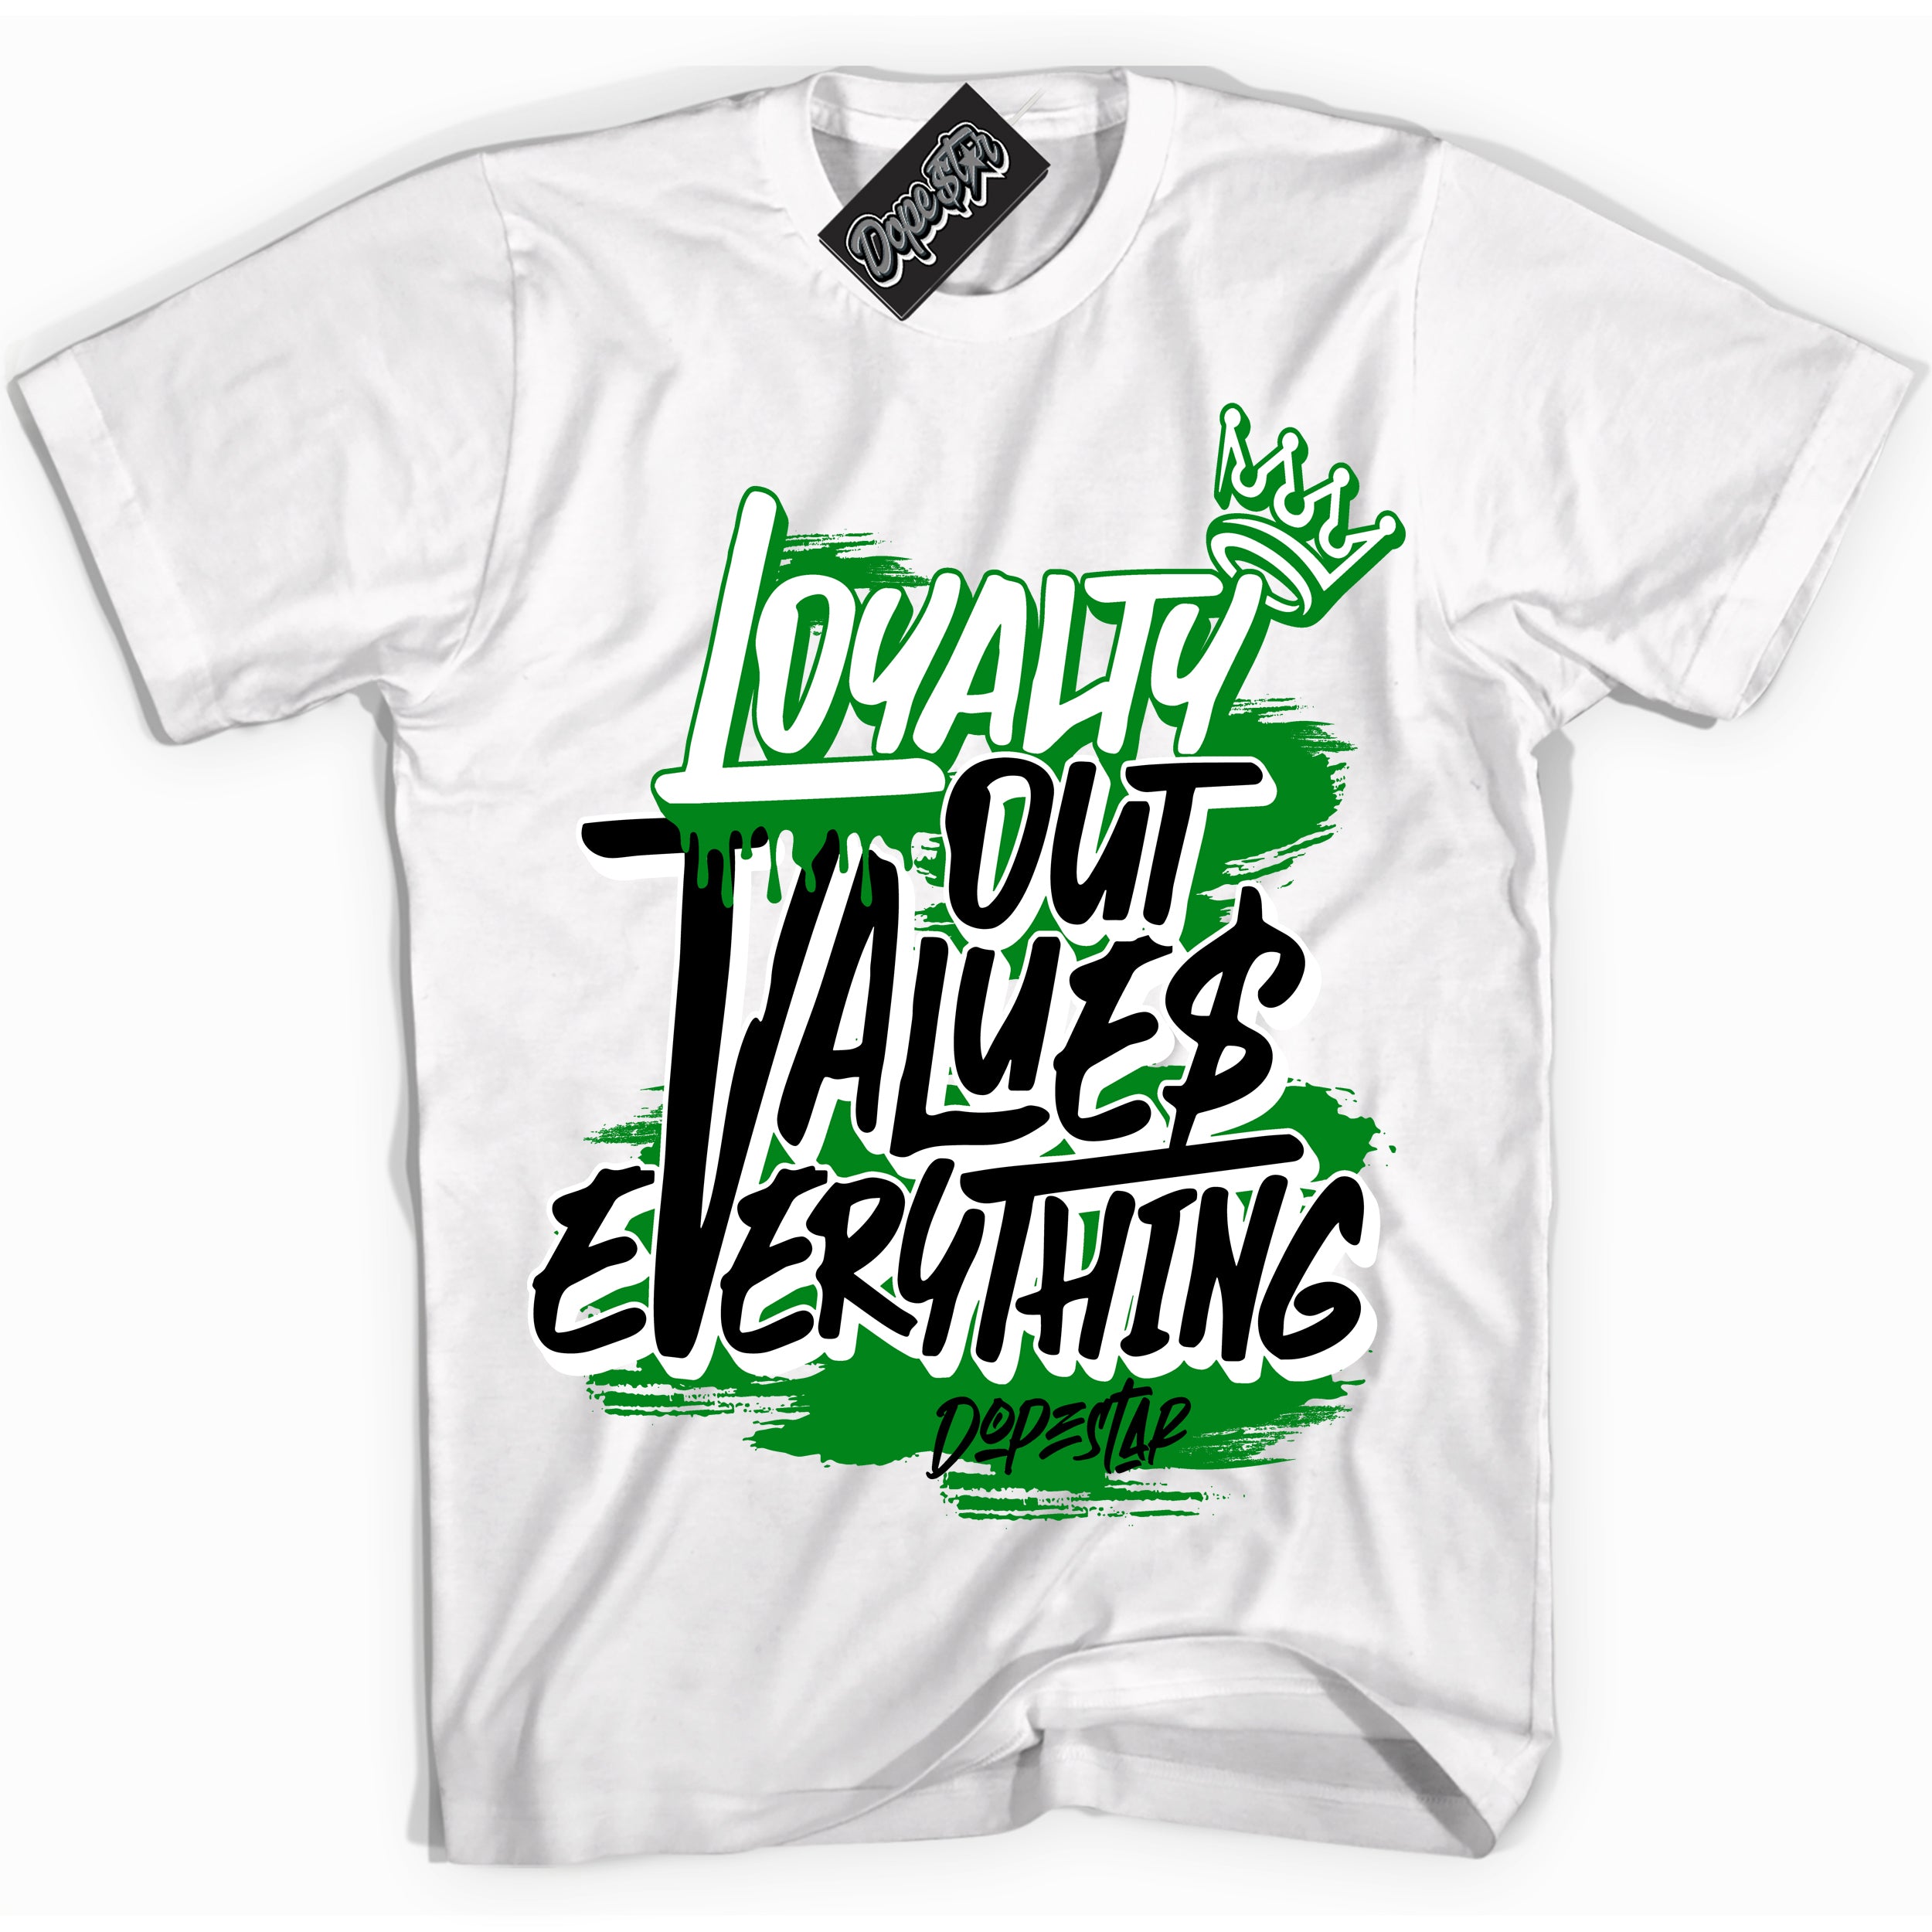 Cool White Shirt with “ Loyalty Out Values Everything” design that perfectly matches Lucky Green 1s Sneakers.